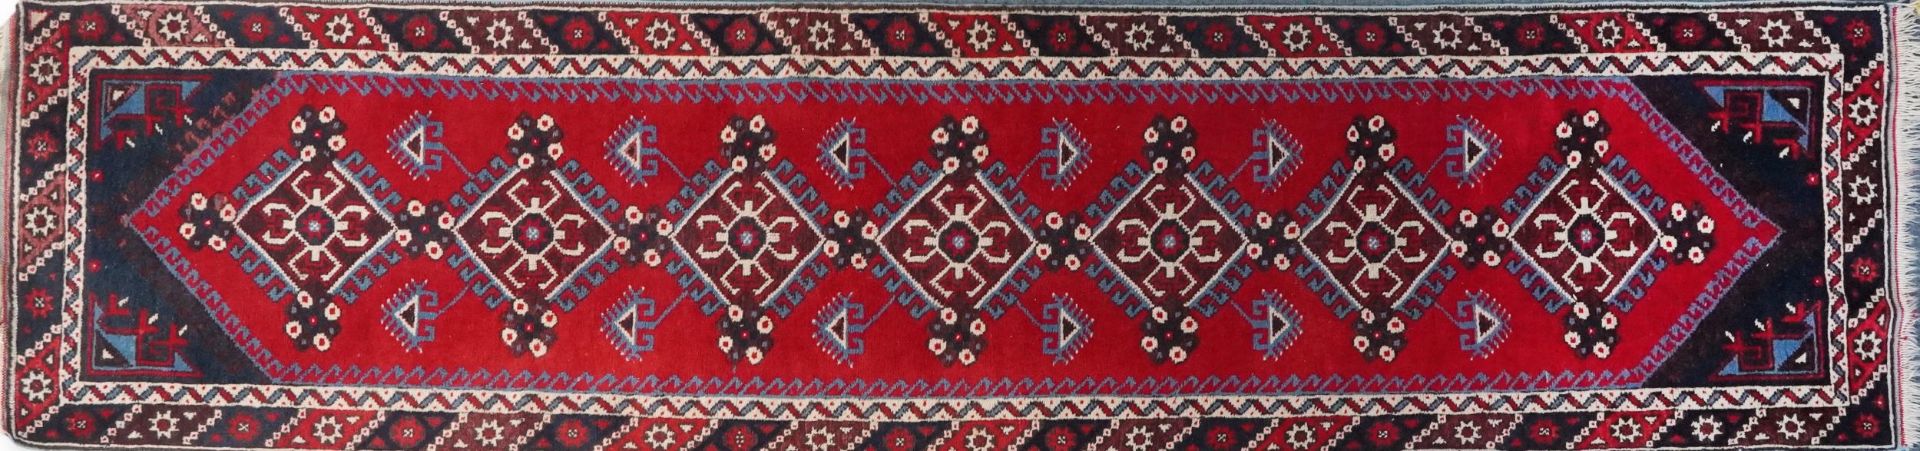 Turkish Red and blue ground carpet runner having an allover repeat geometric design, 295cm x